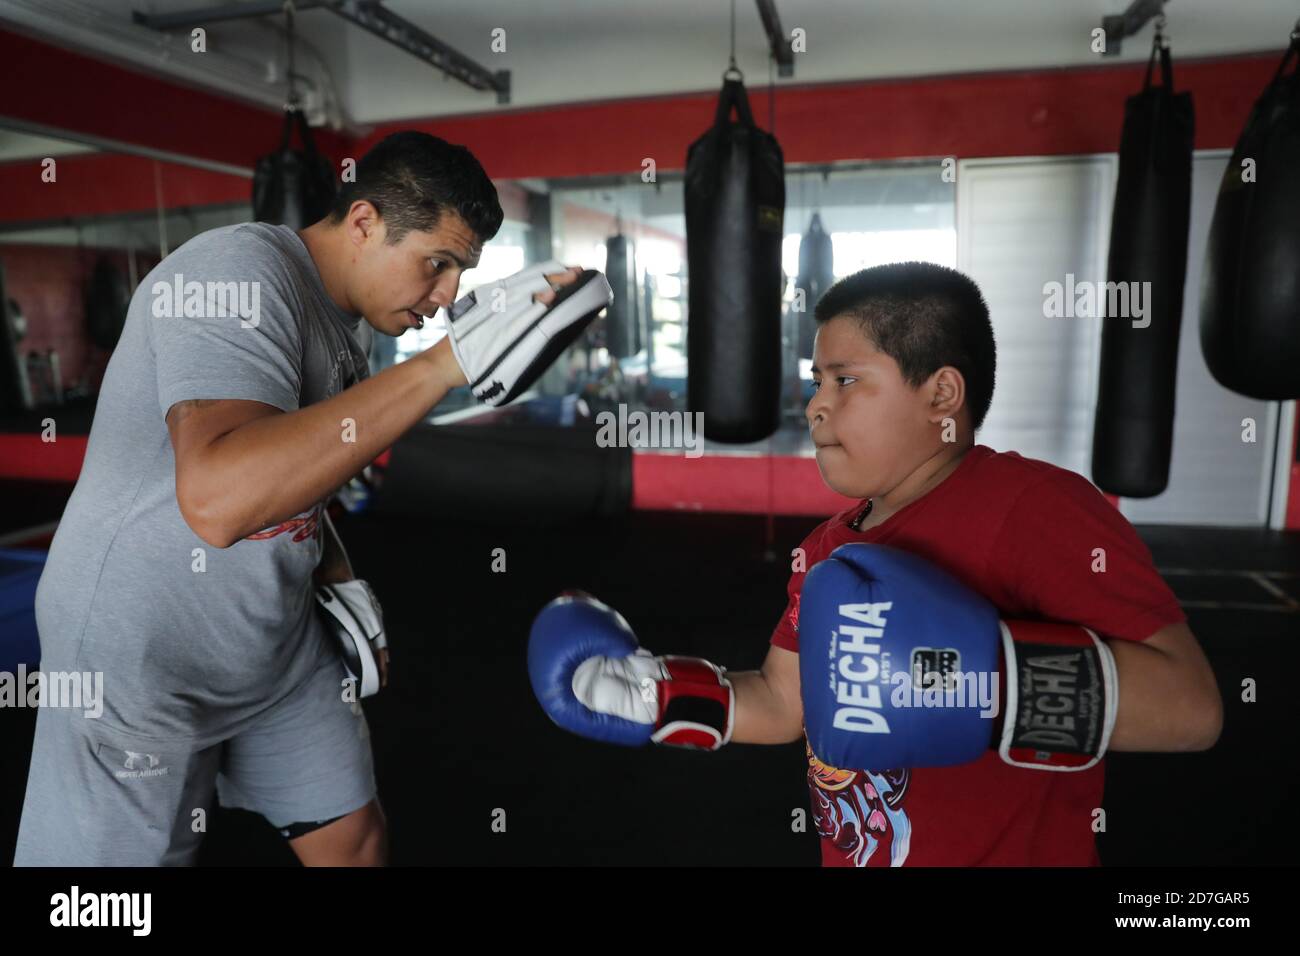 Jonny Garcia Jimenez, an 11-year-old boy, has the dream of dedicating  himself to Boxing in a professional way and at his young age he has been  one of the most outstanding students